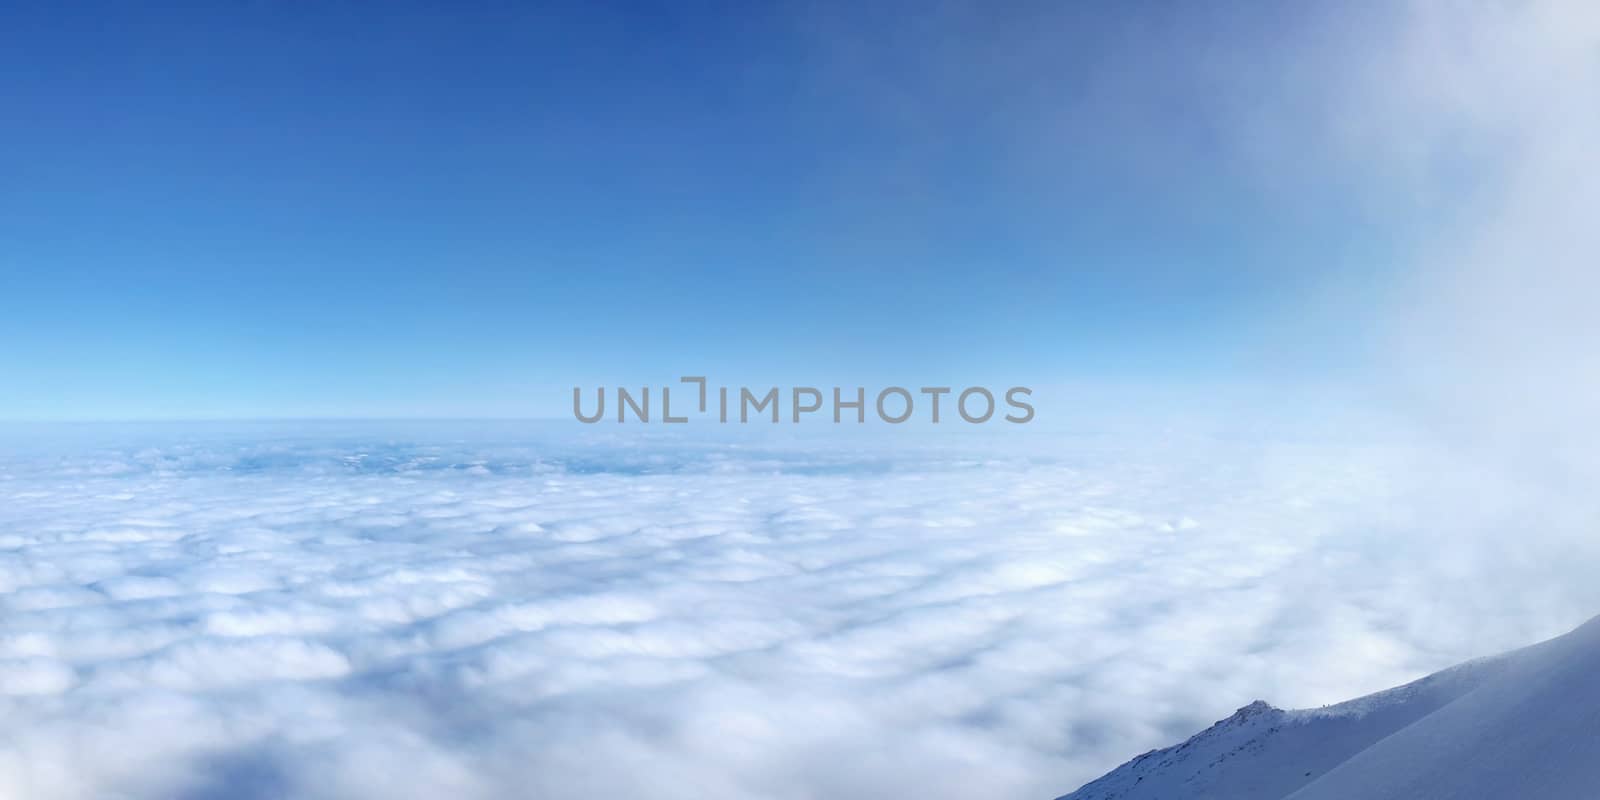 Temperature inversion forming sea of clouds seen from above, hig by Ivanko